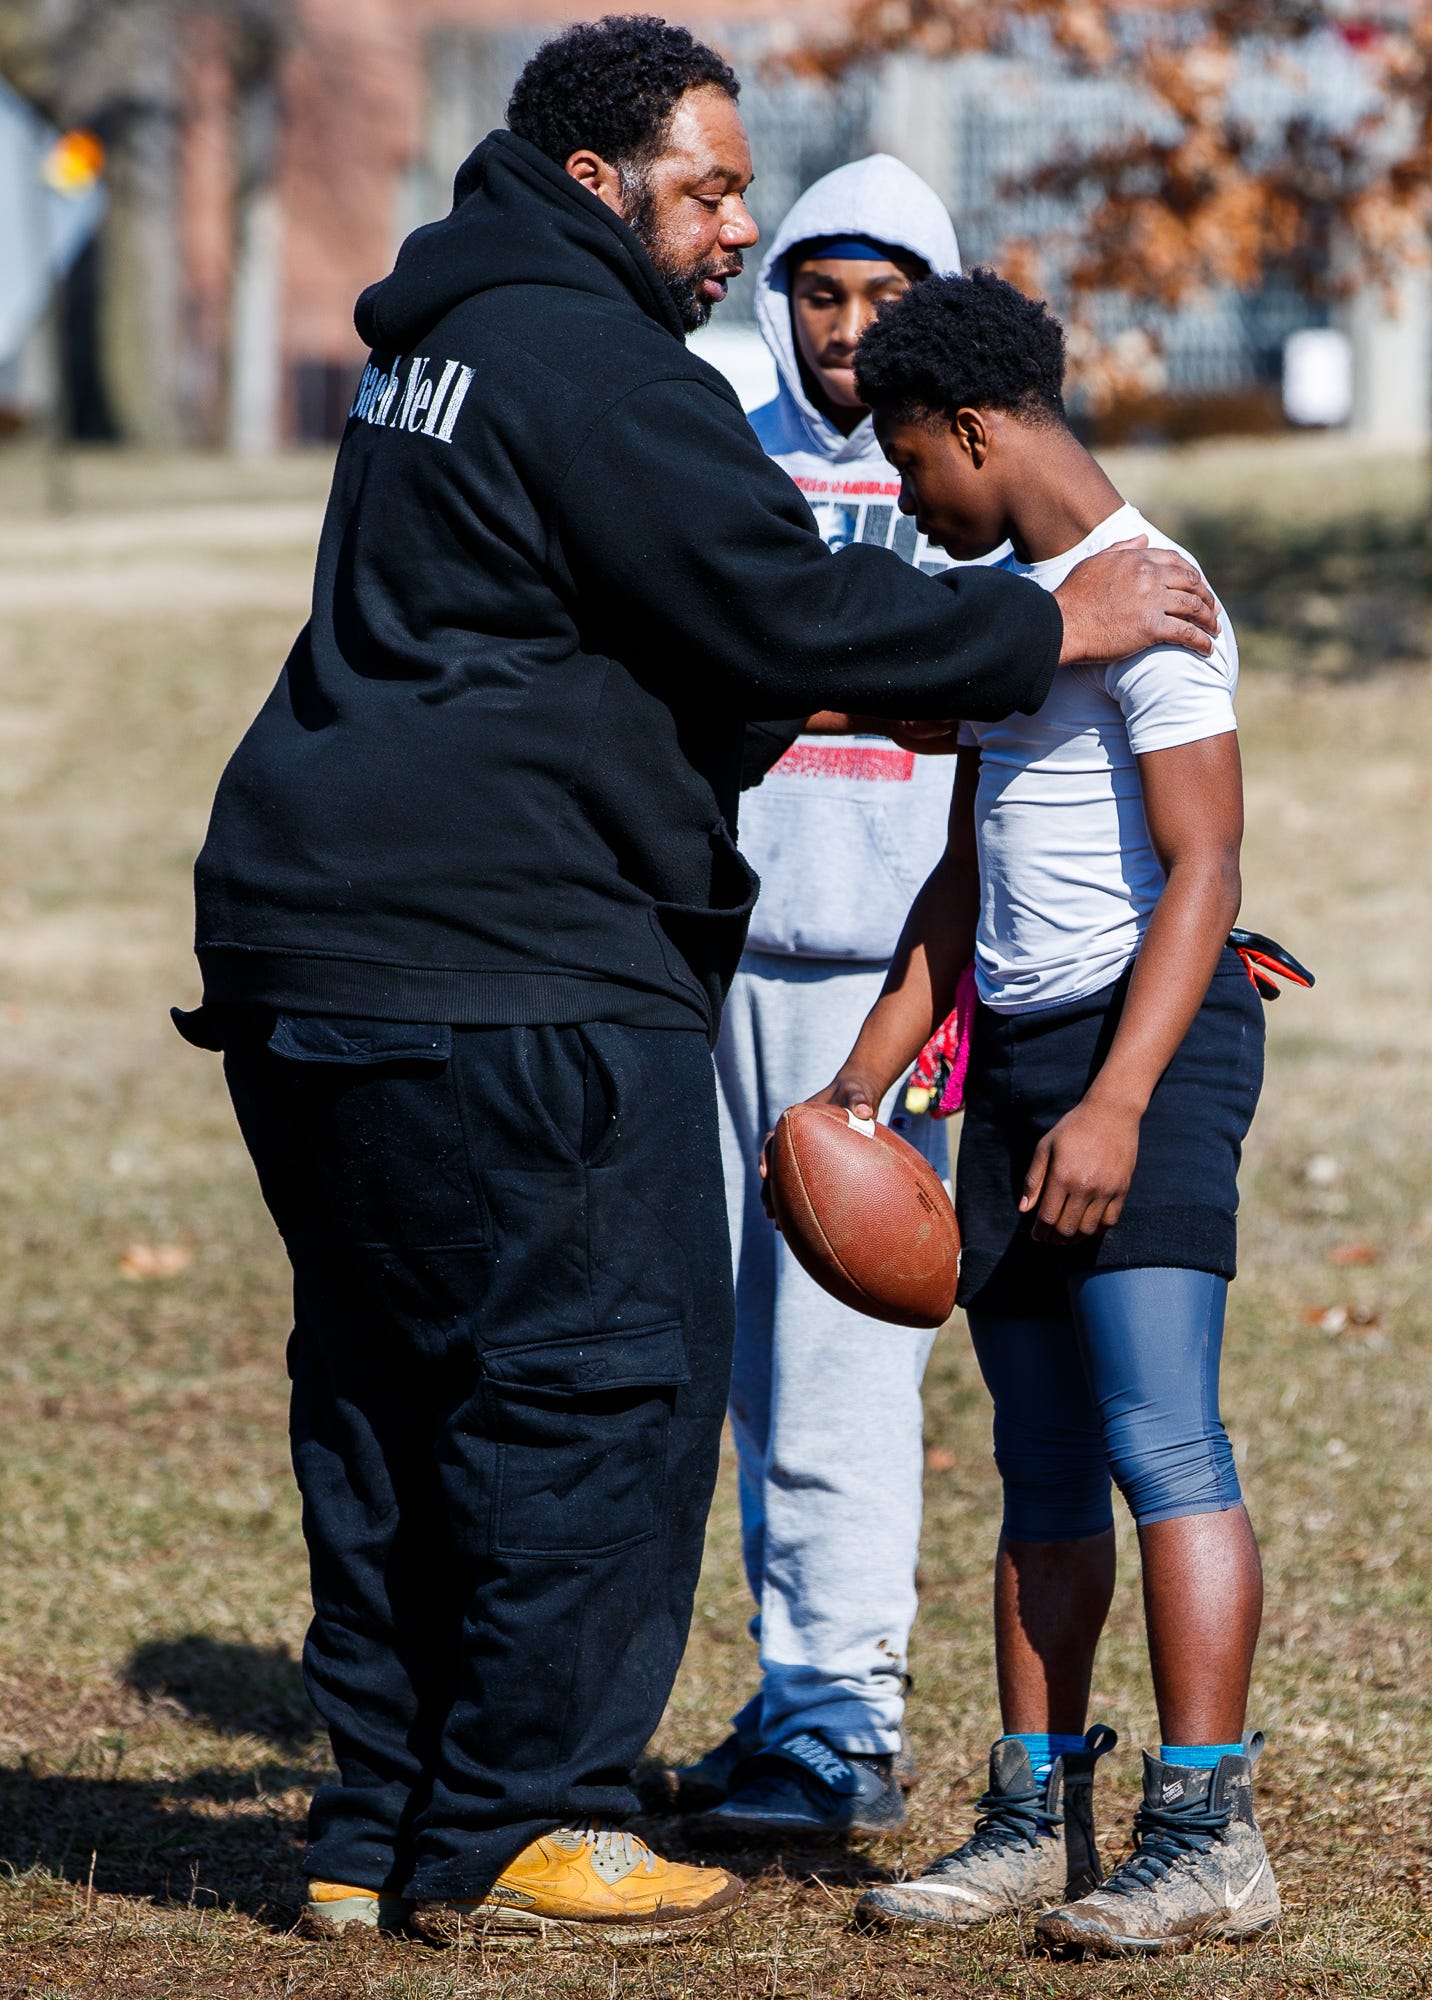 'Coach Nell' devoted his life to ending gun violence. Then he was shot